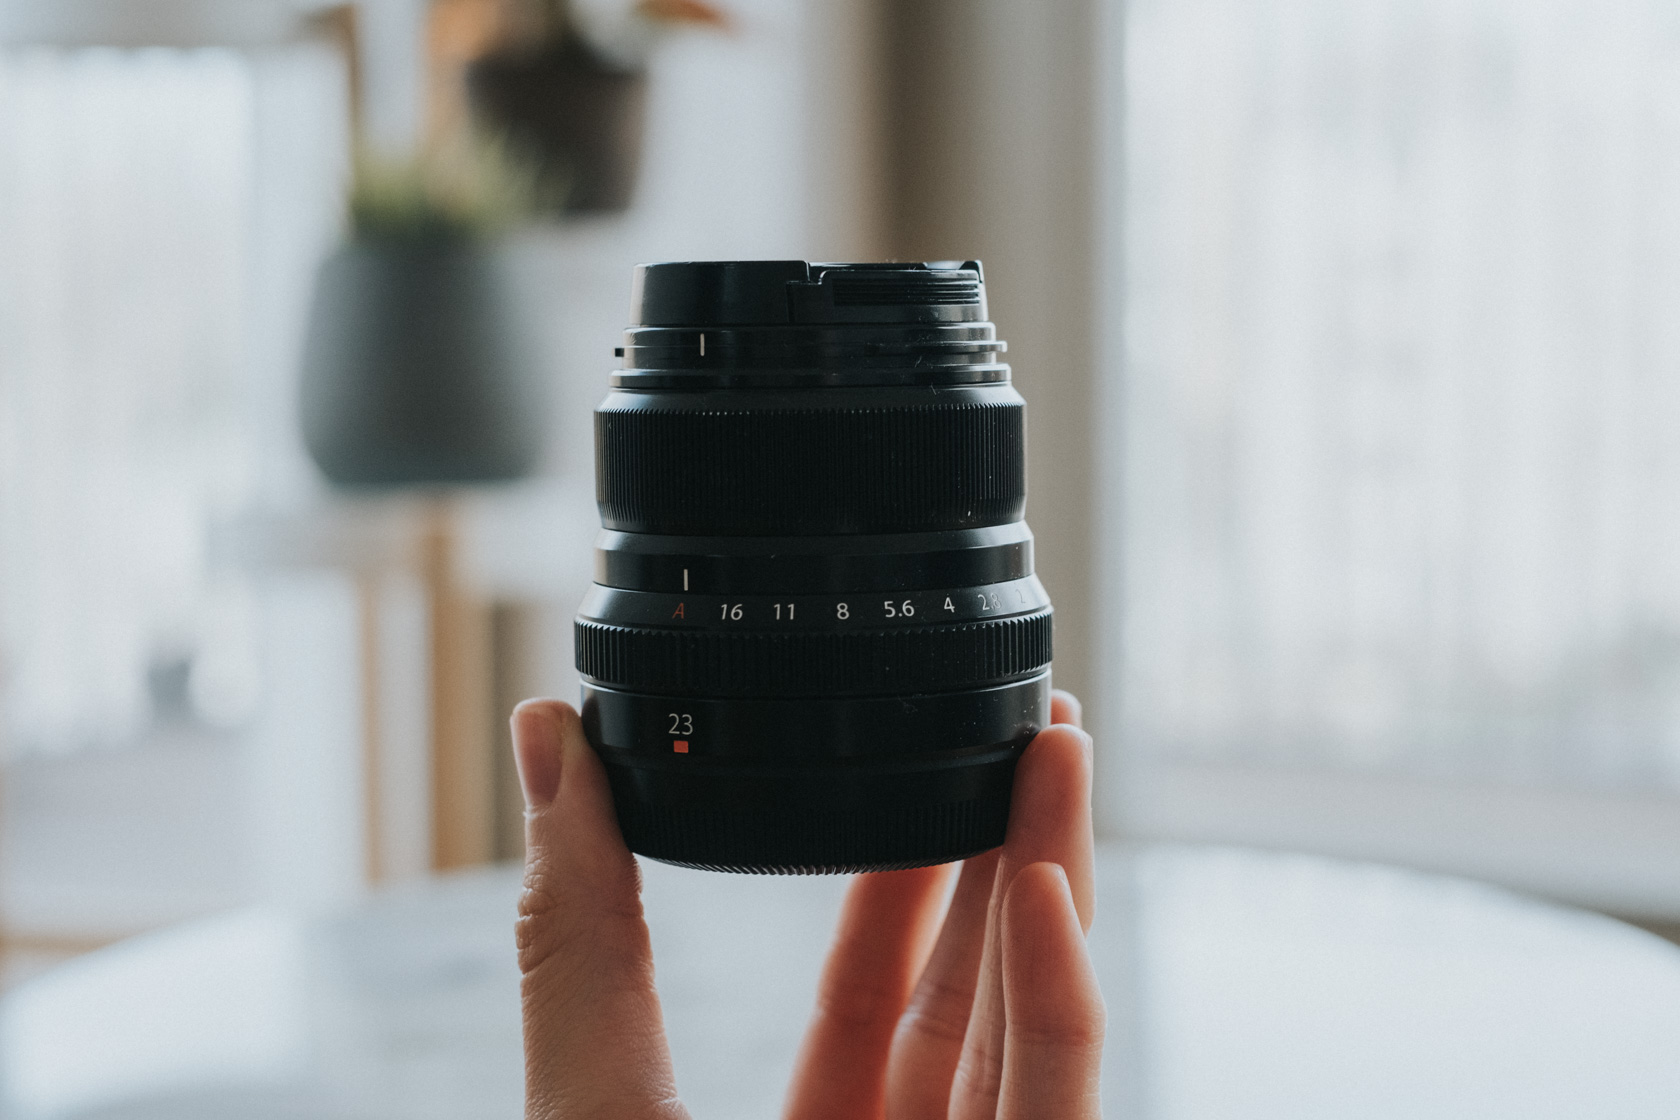 REVIEW: Fuji XF 23mm f2 WR (Pros, cons, & sample images)